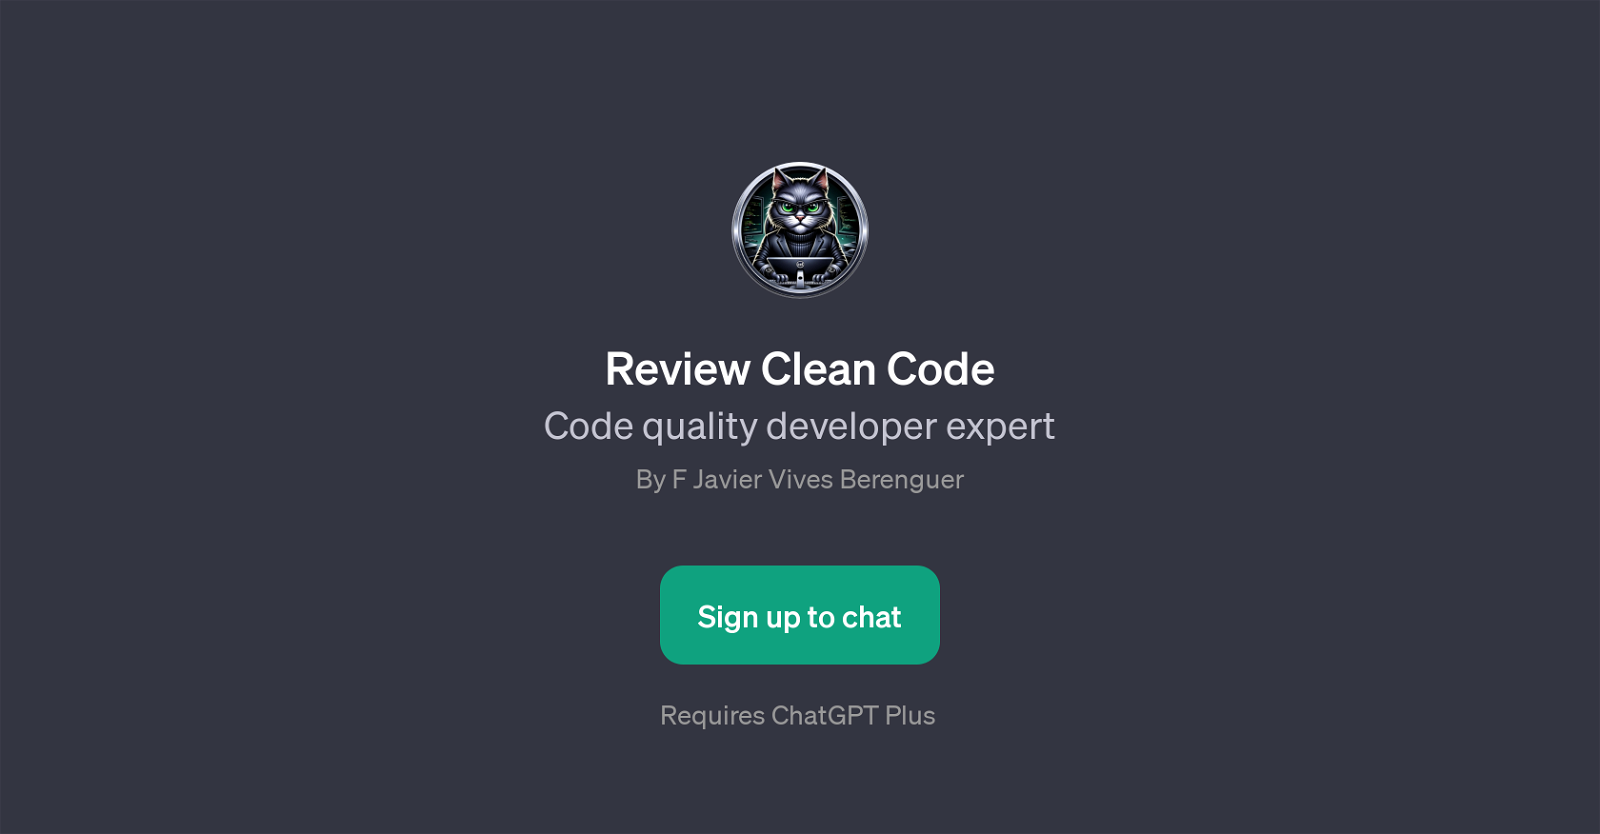 Review Clean Code website